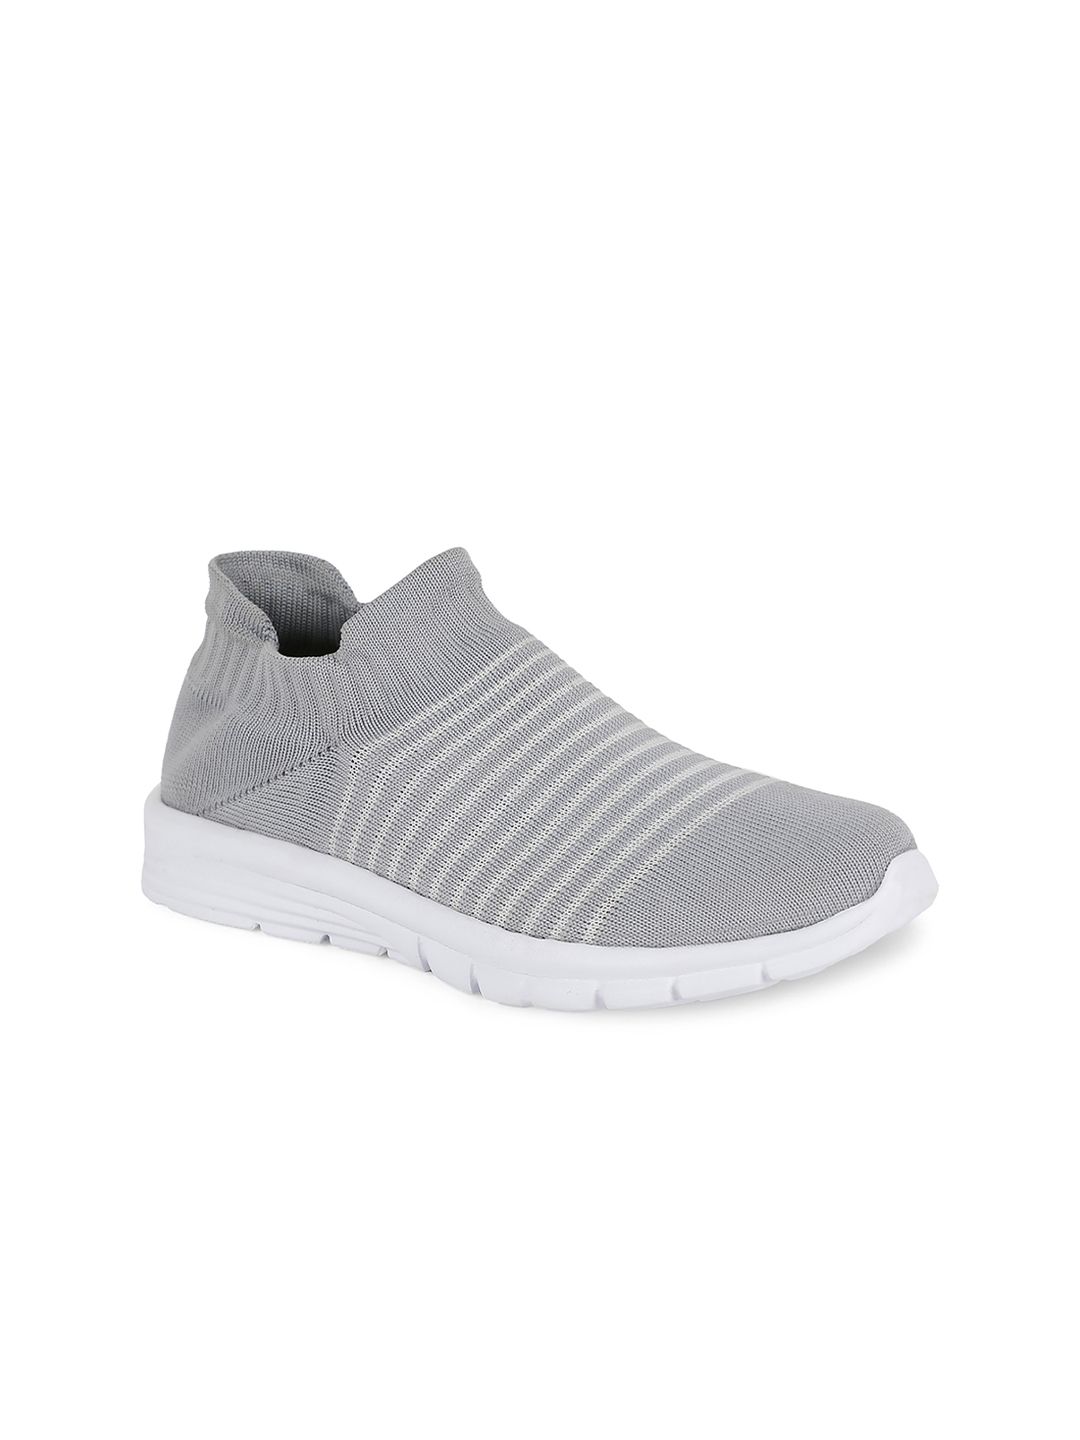 Khadims Women Grey Textile Training or Gym Shoes Price in India